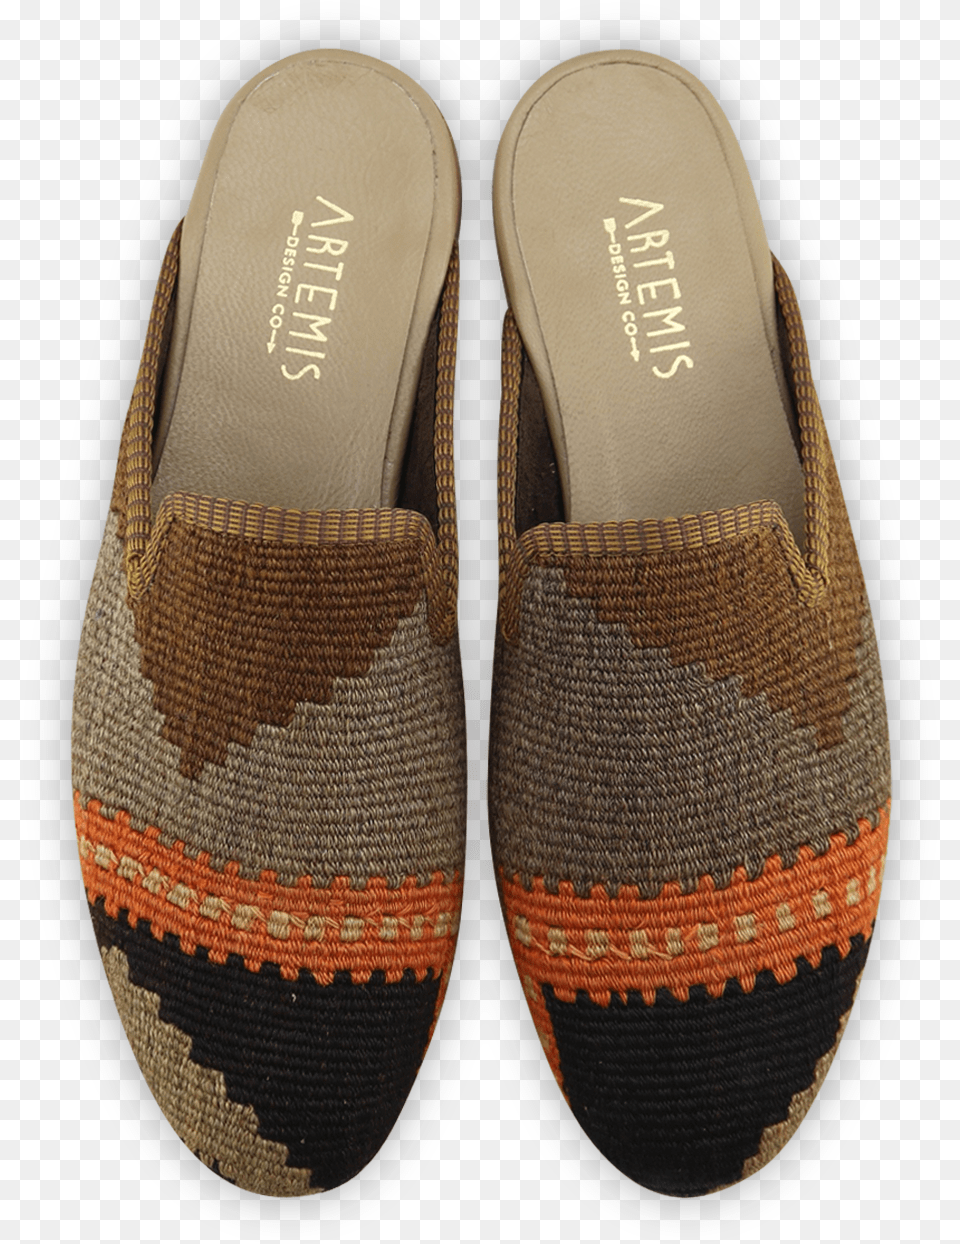 Slip On Shoe, Clothing, Footwear, Woven Free Transparent Png